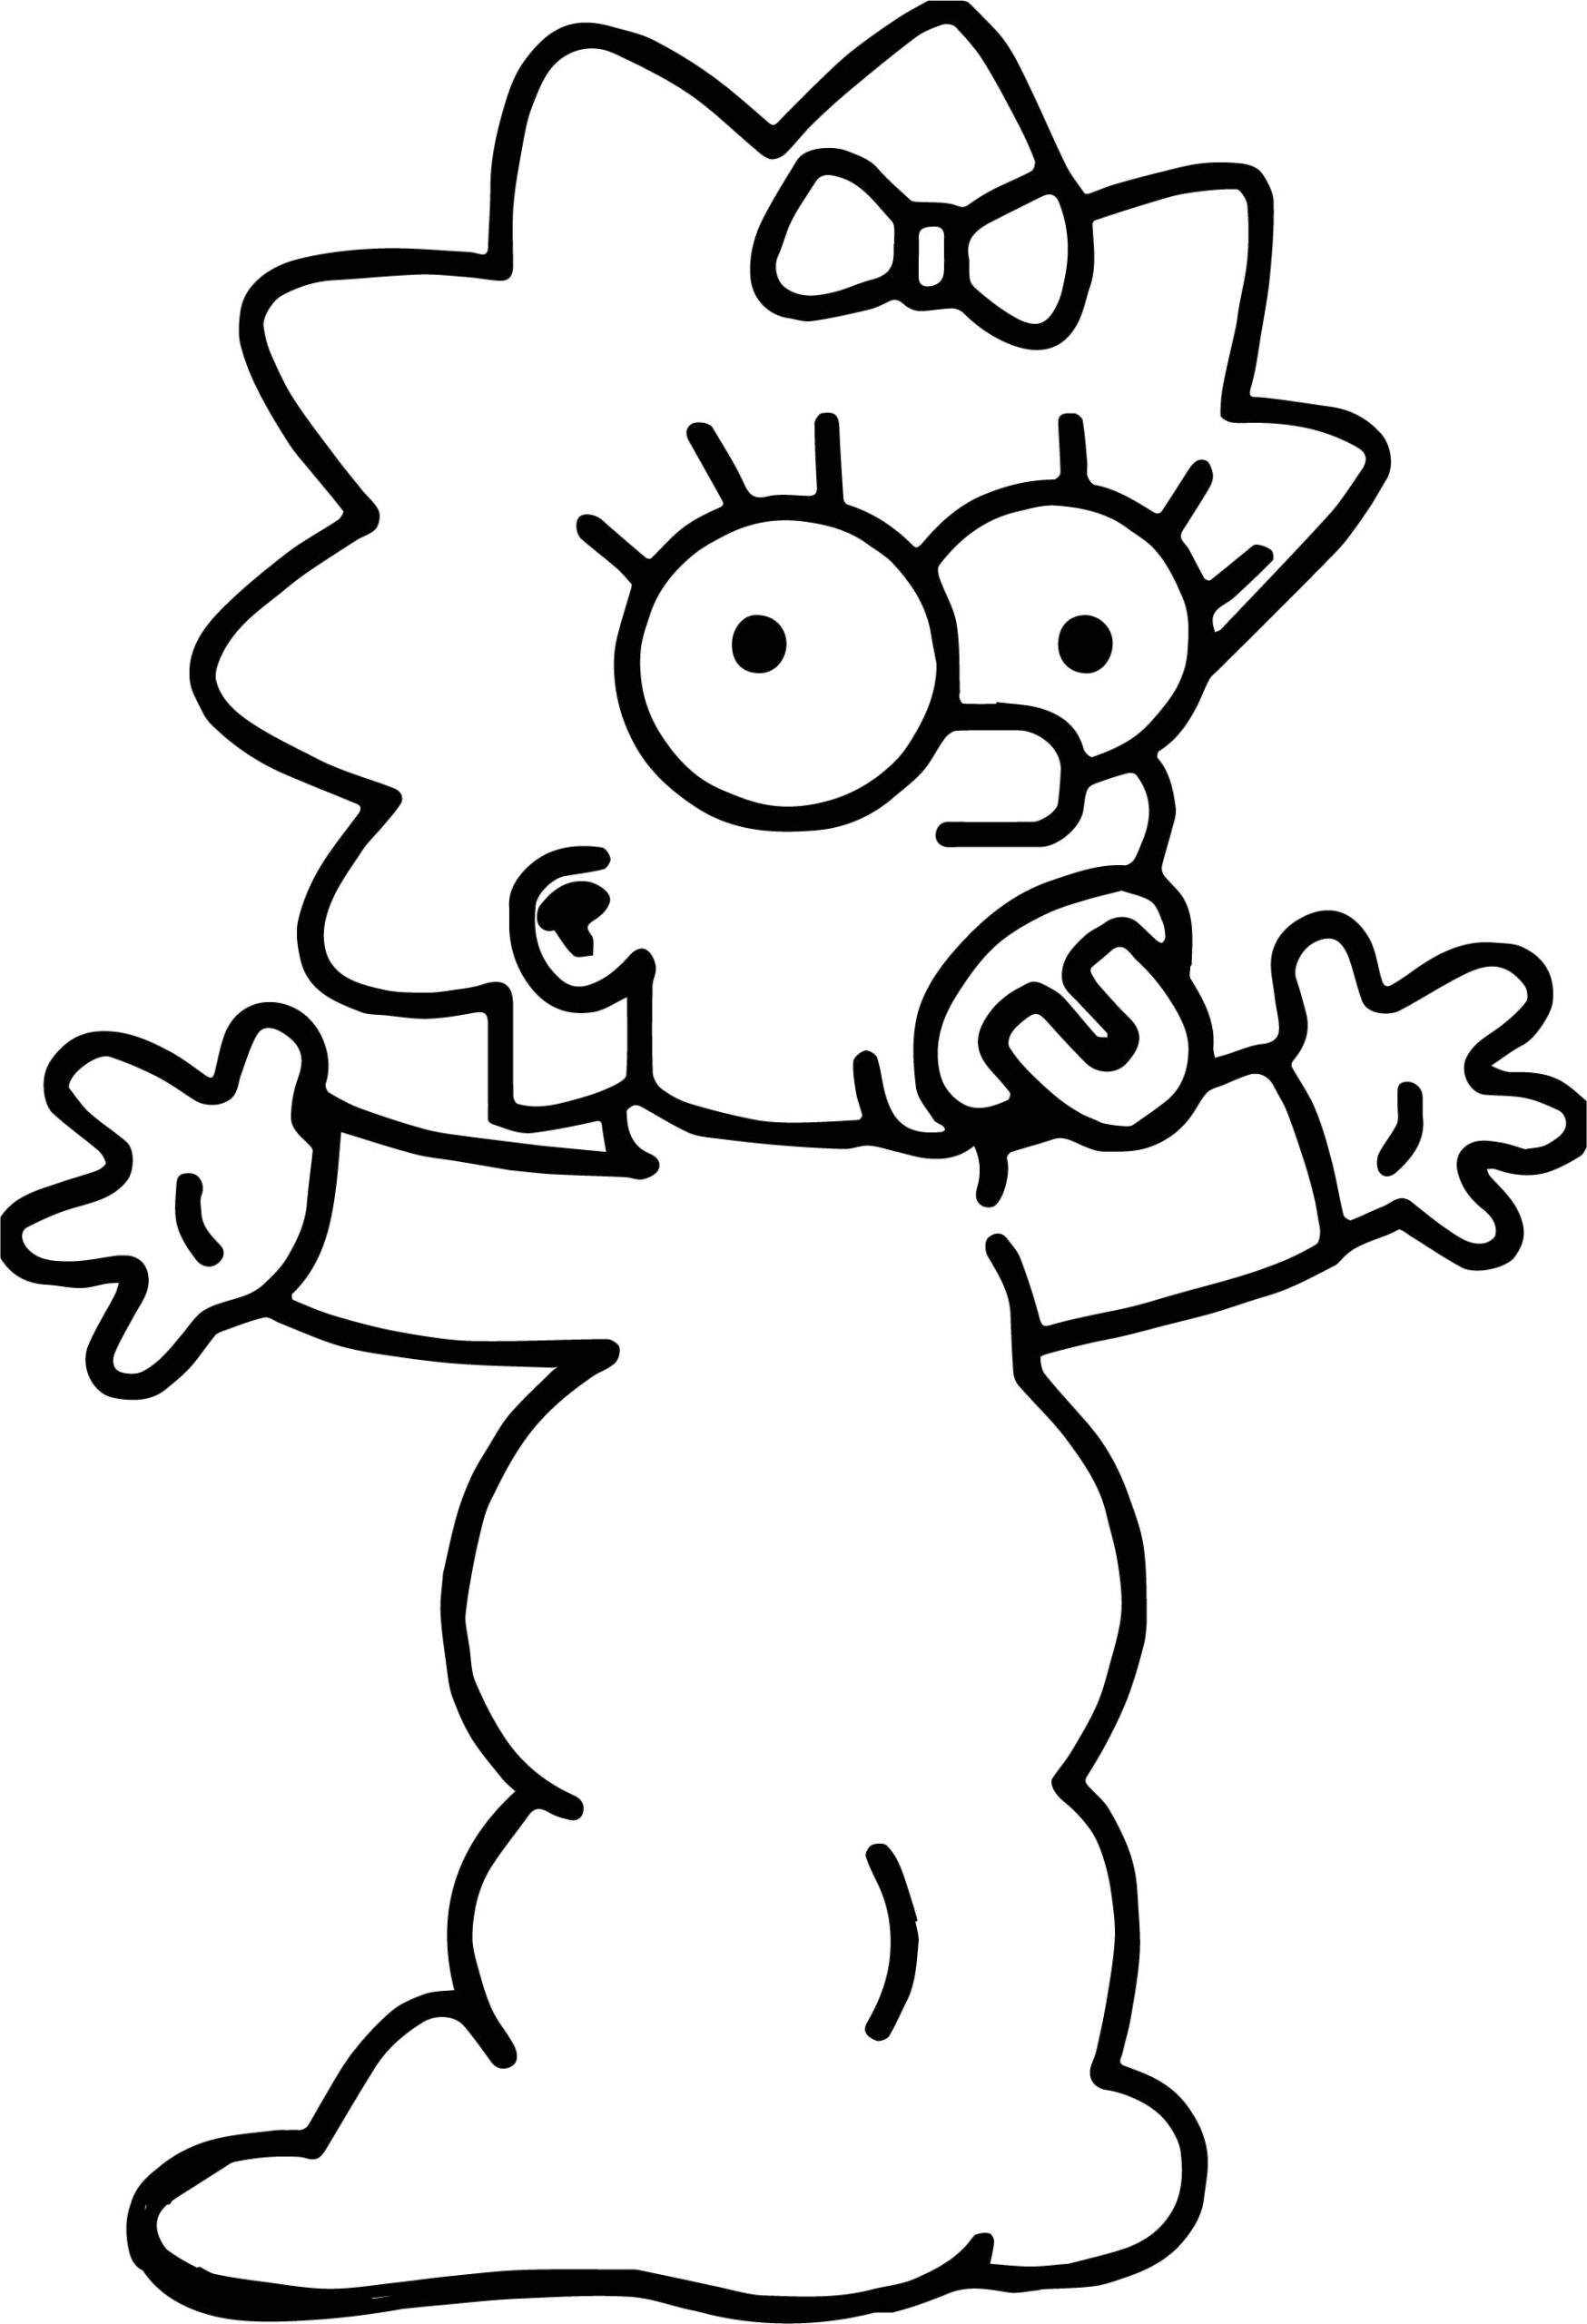 simpsons coloring pages free maggie simpson the simpsons coloring page wecoloringpage